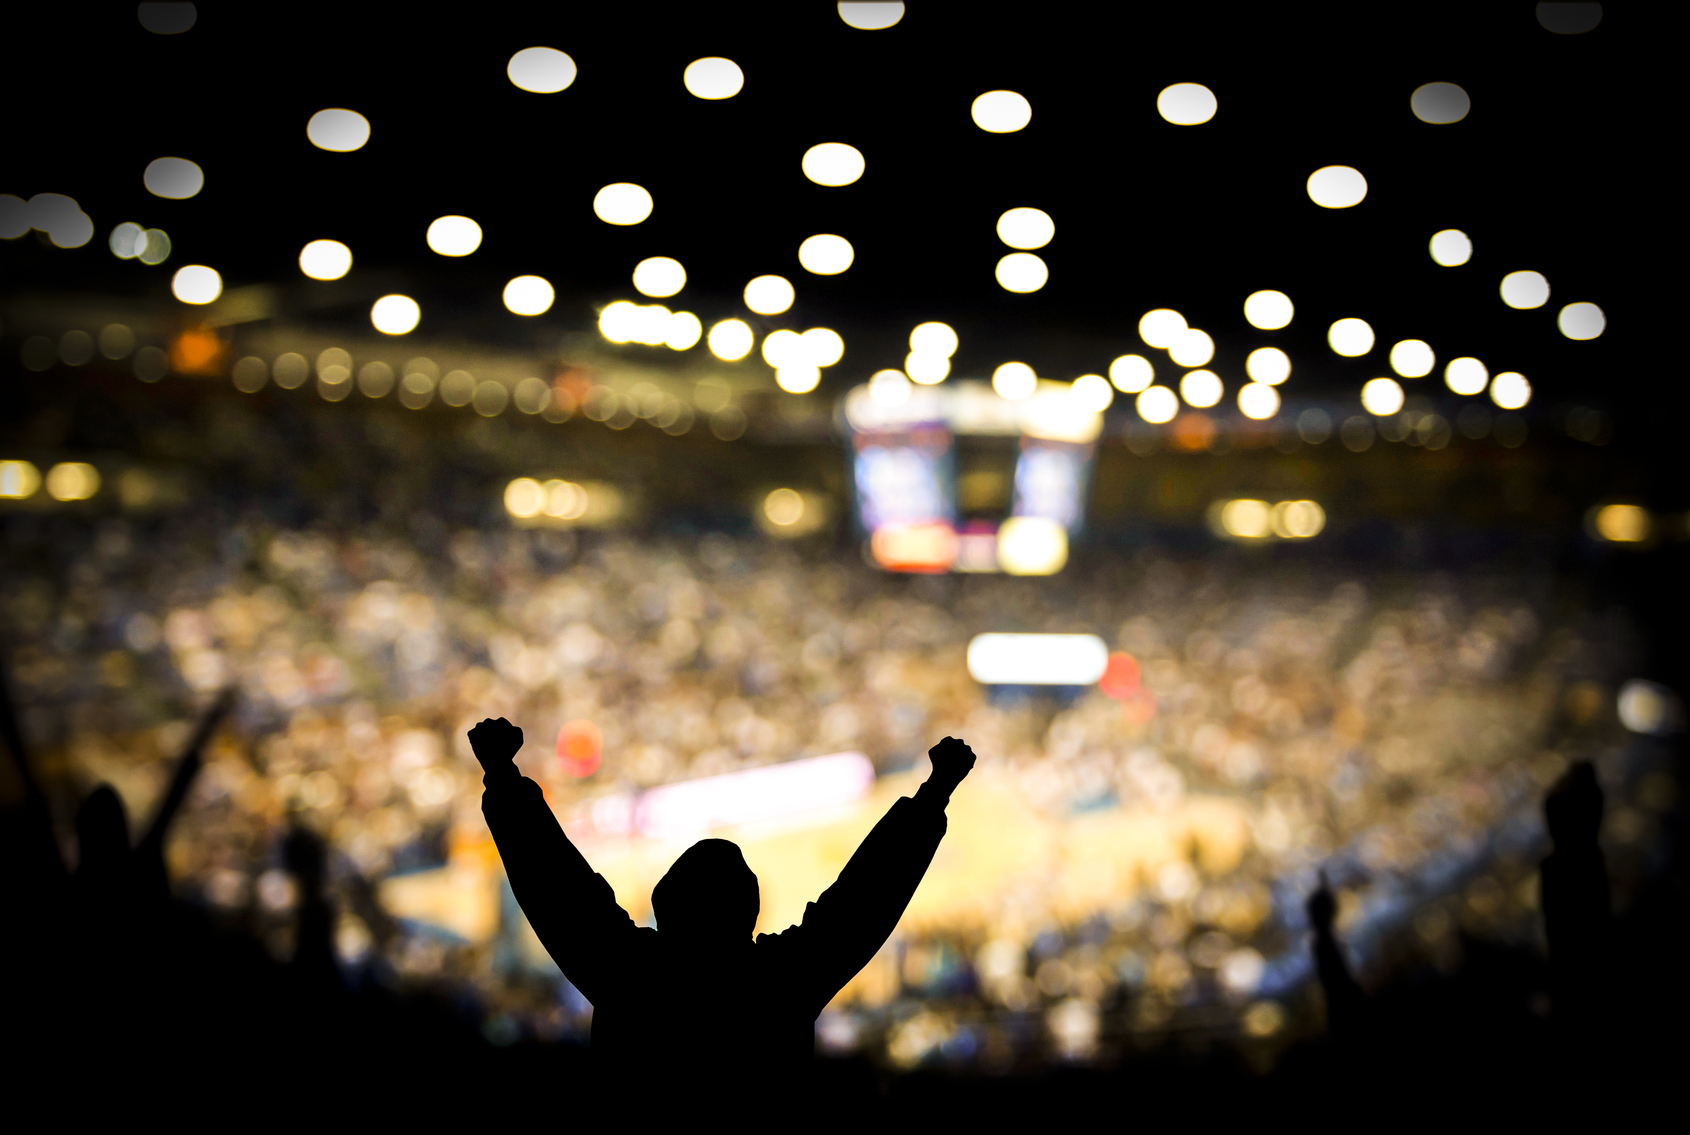 Fans excited at basketball game. Silhouetted fans raising arms in celebration at a basketball game.